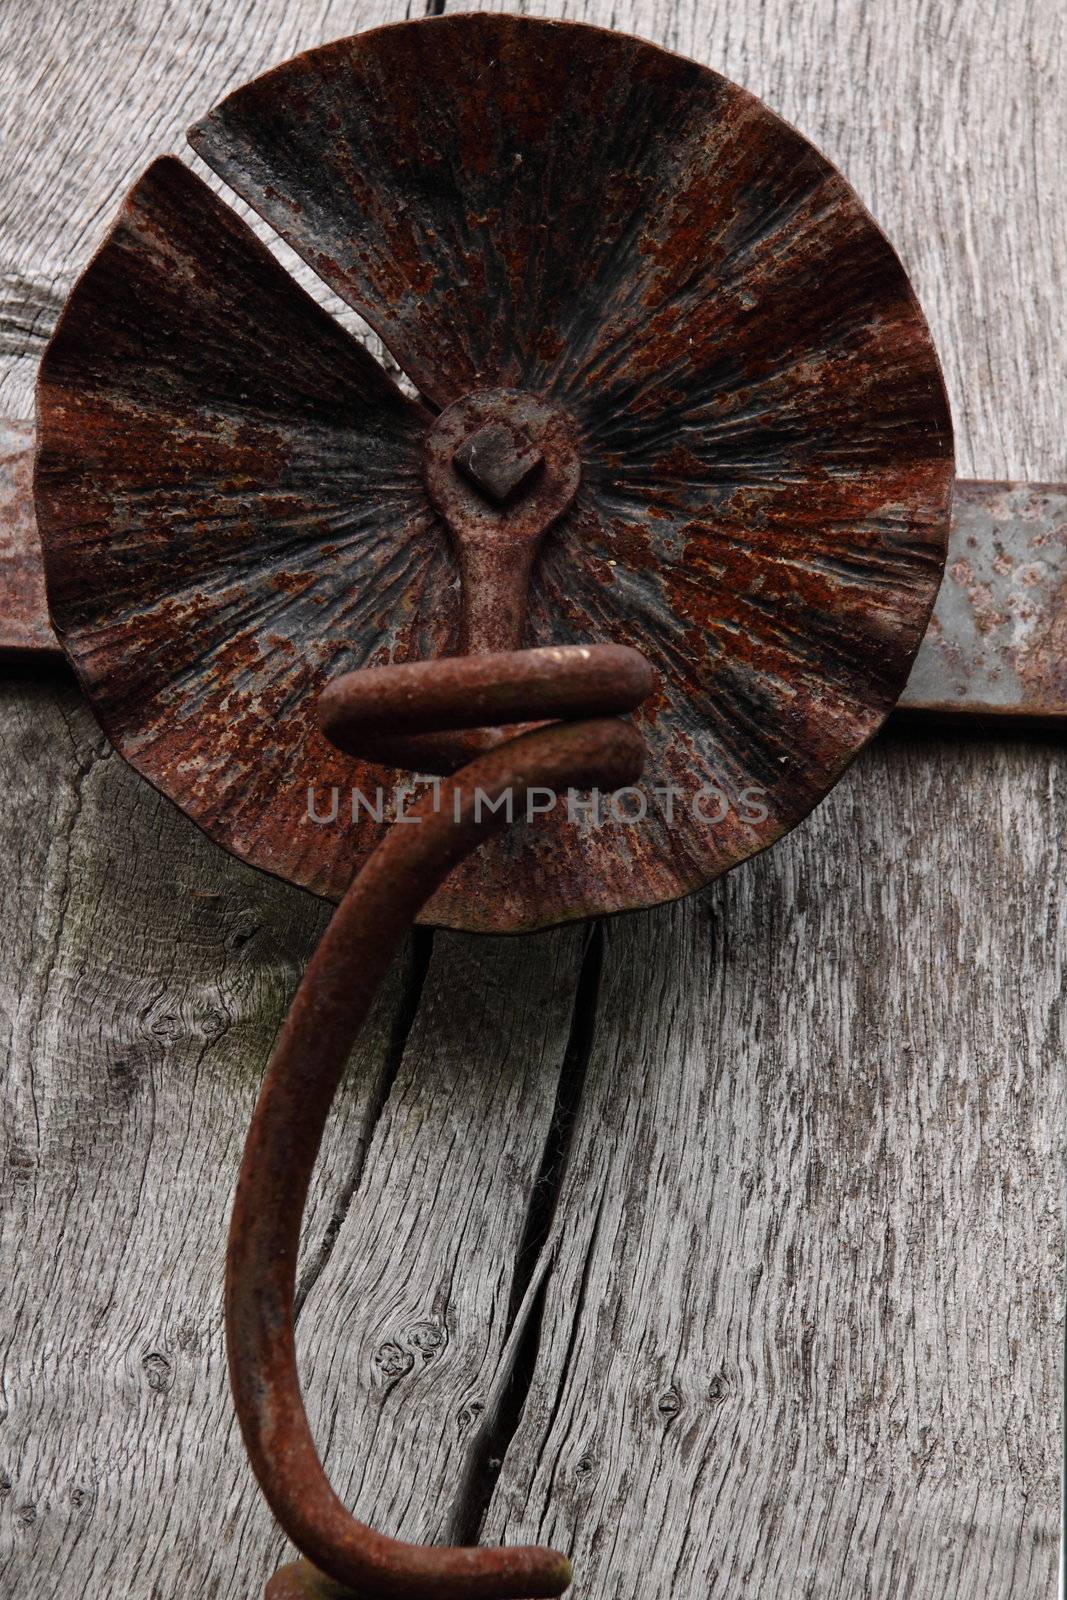 Rusted ornamental metalwork attached to a wooden gateway